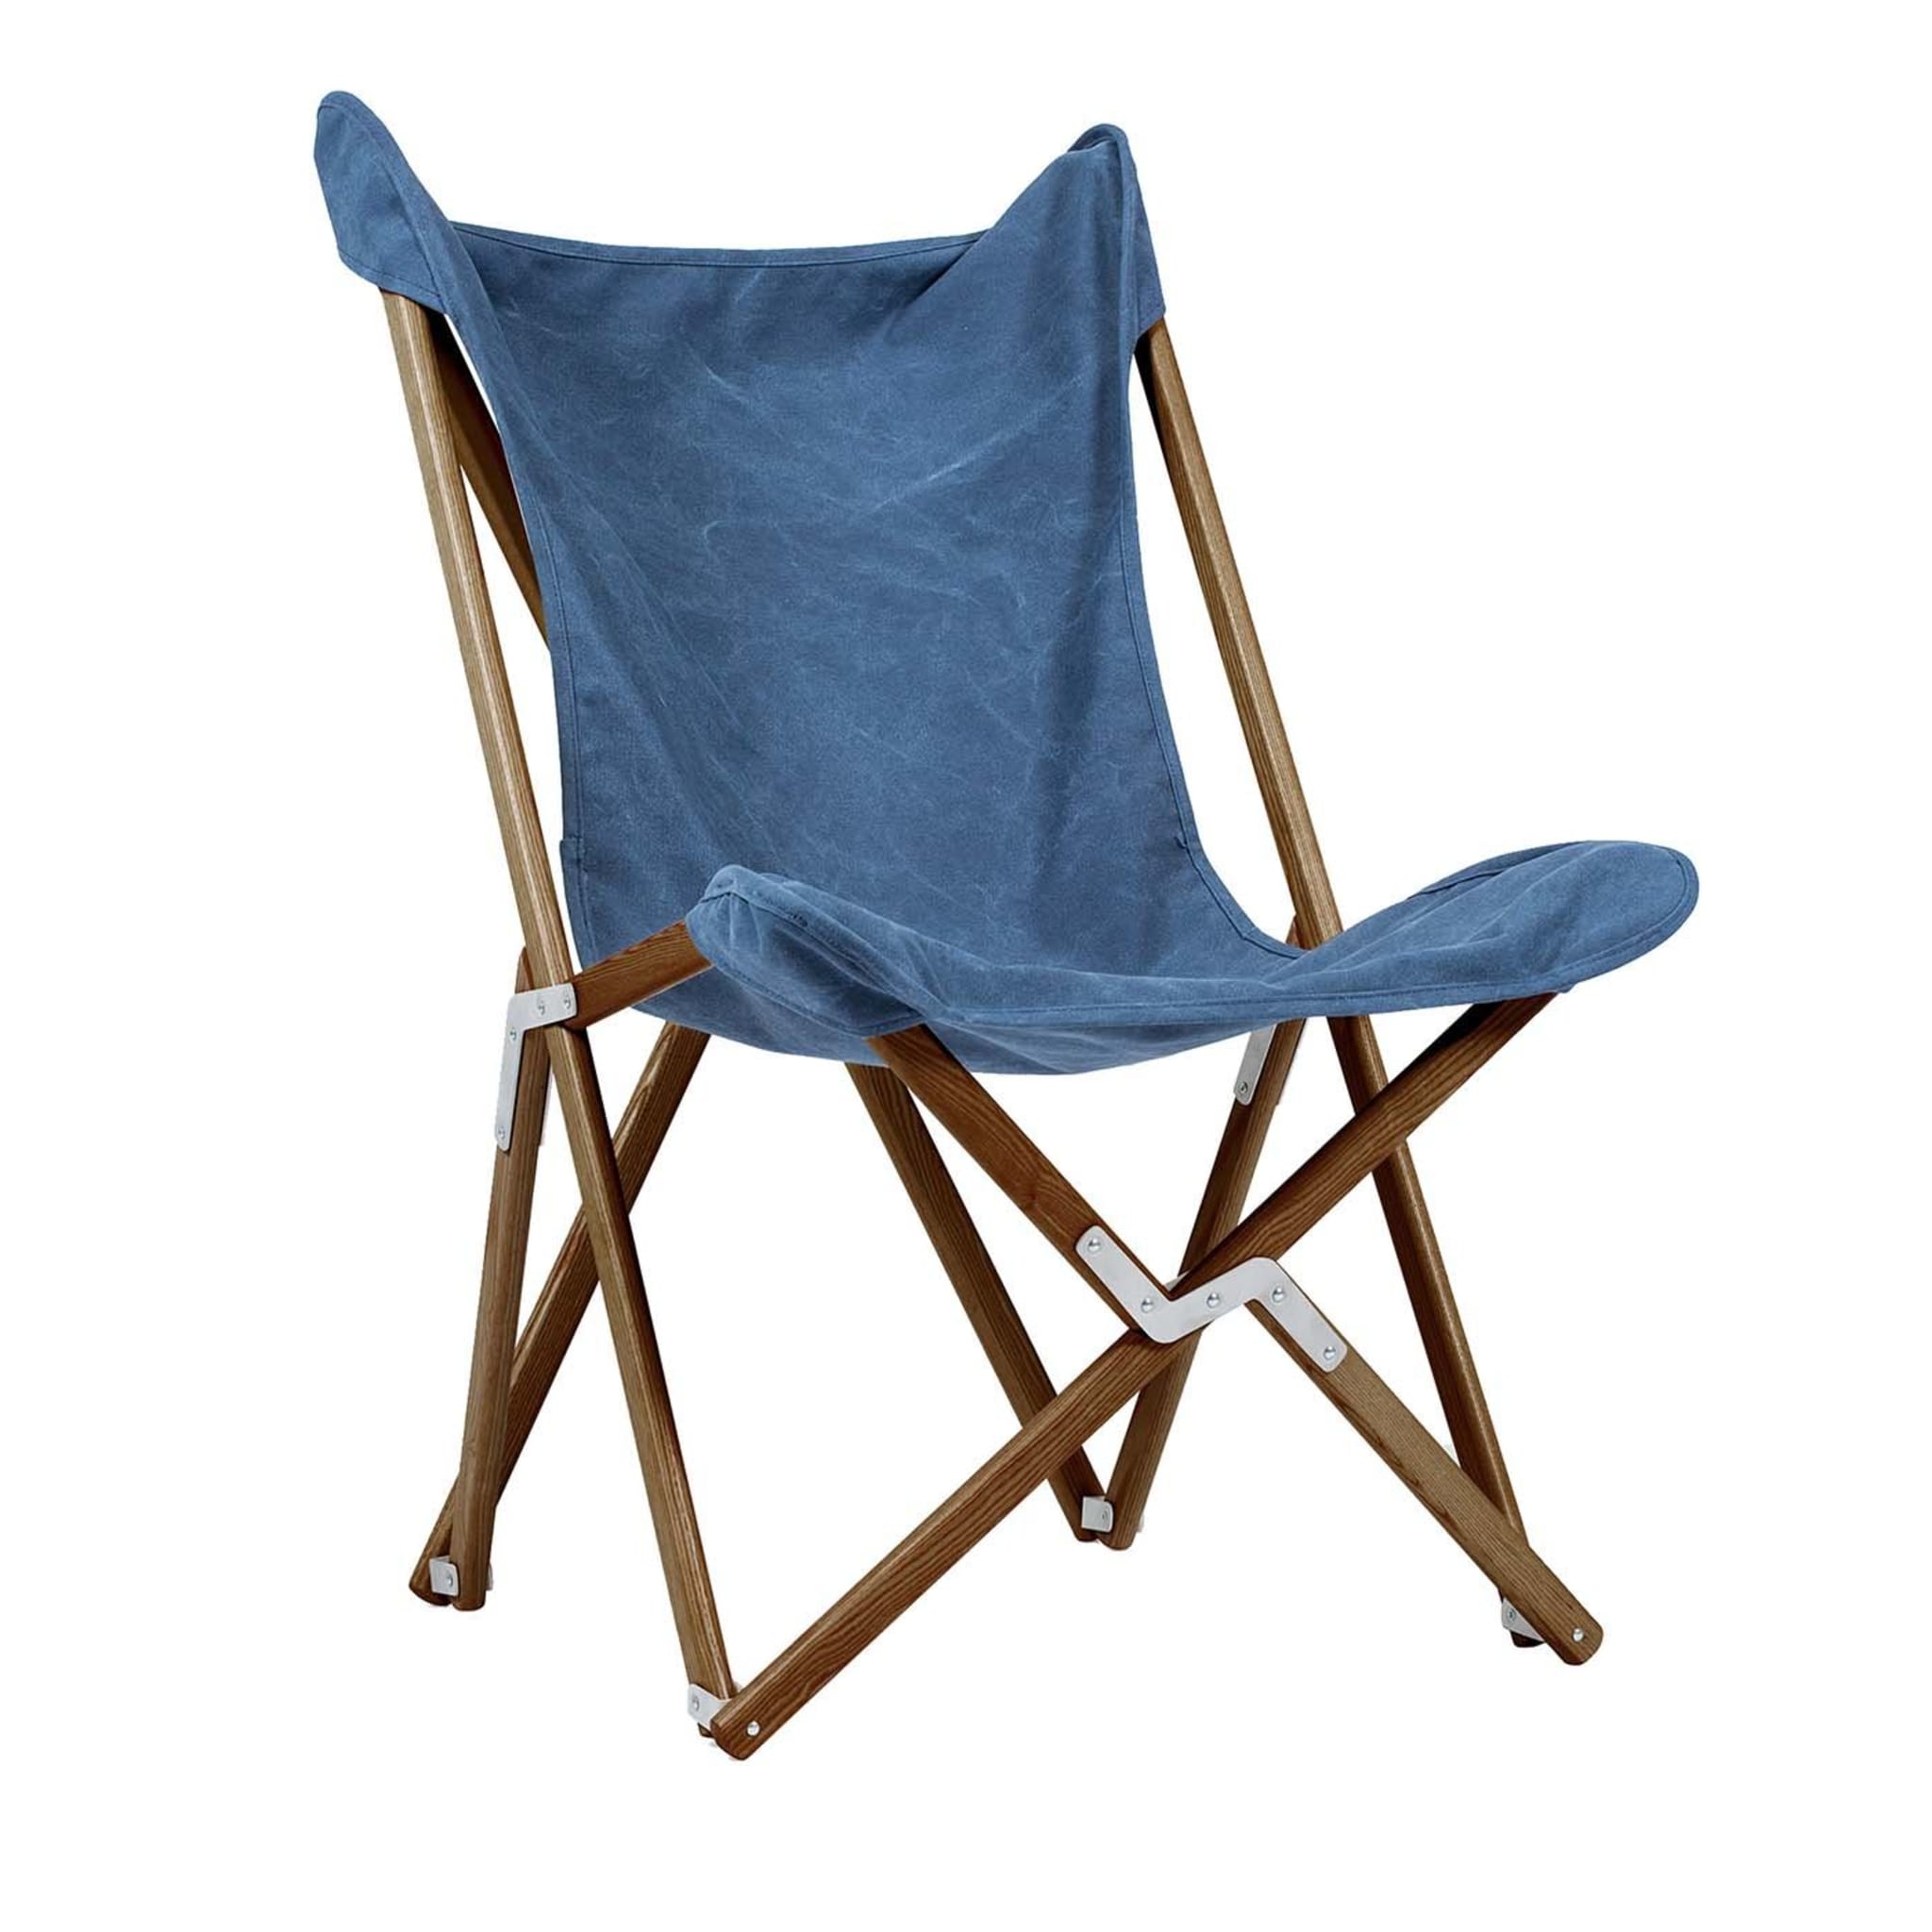 Tripolina Armchair in Blue Jeans - Main view